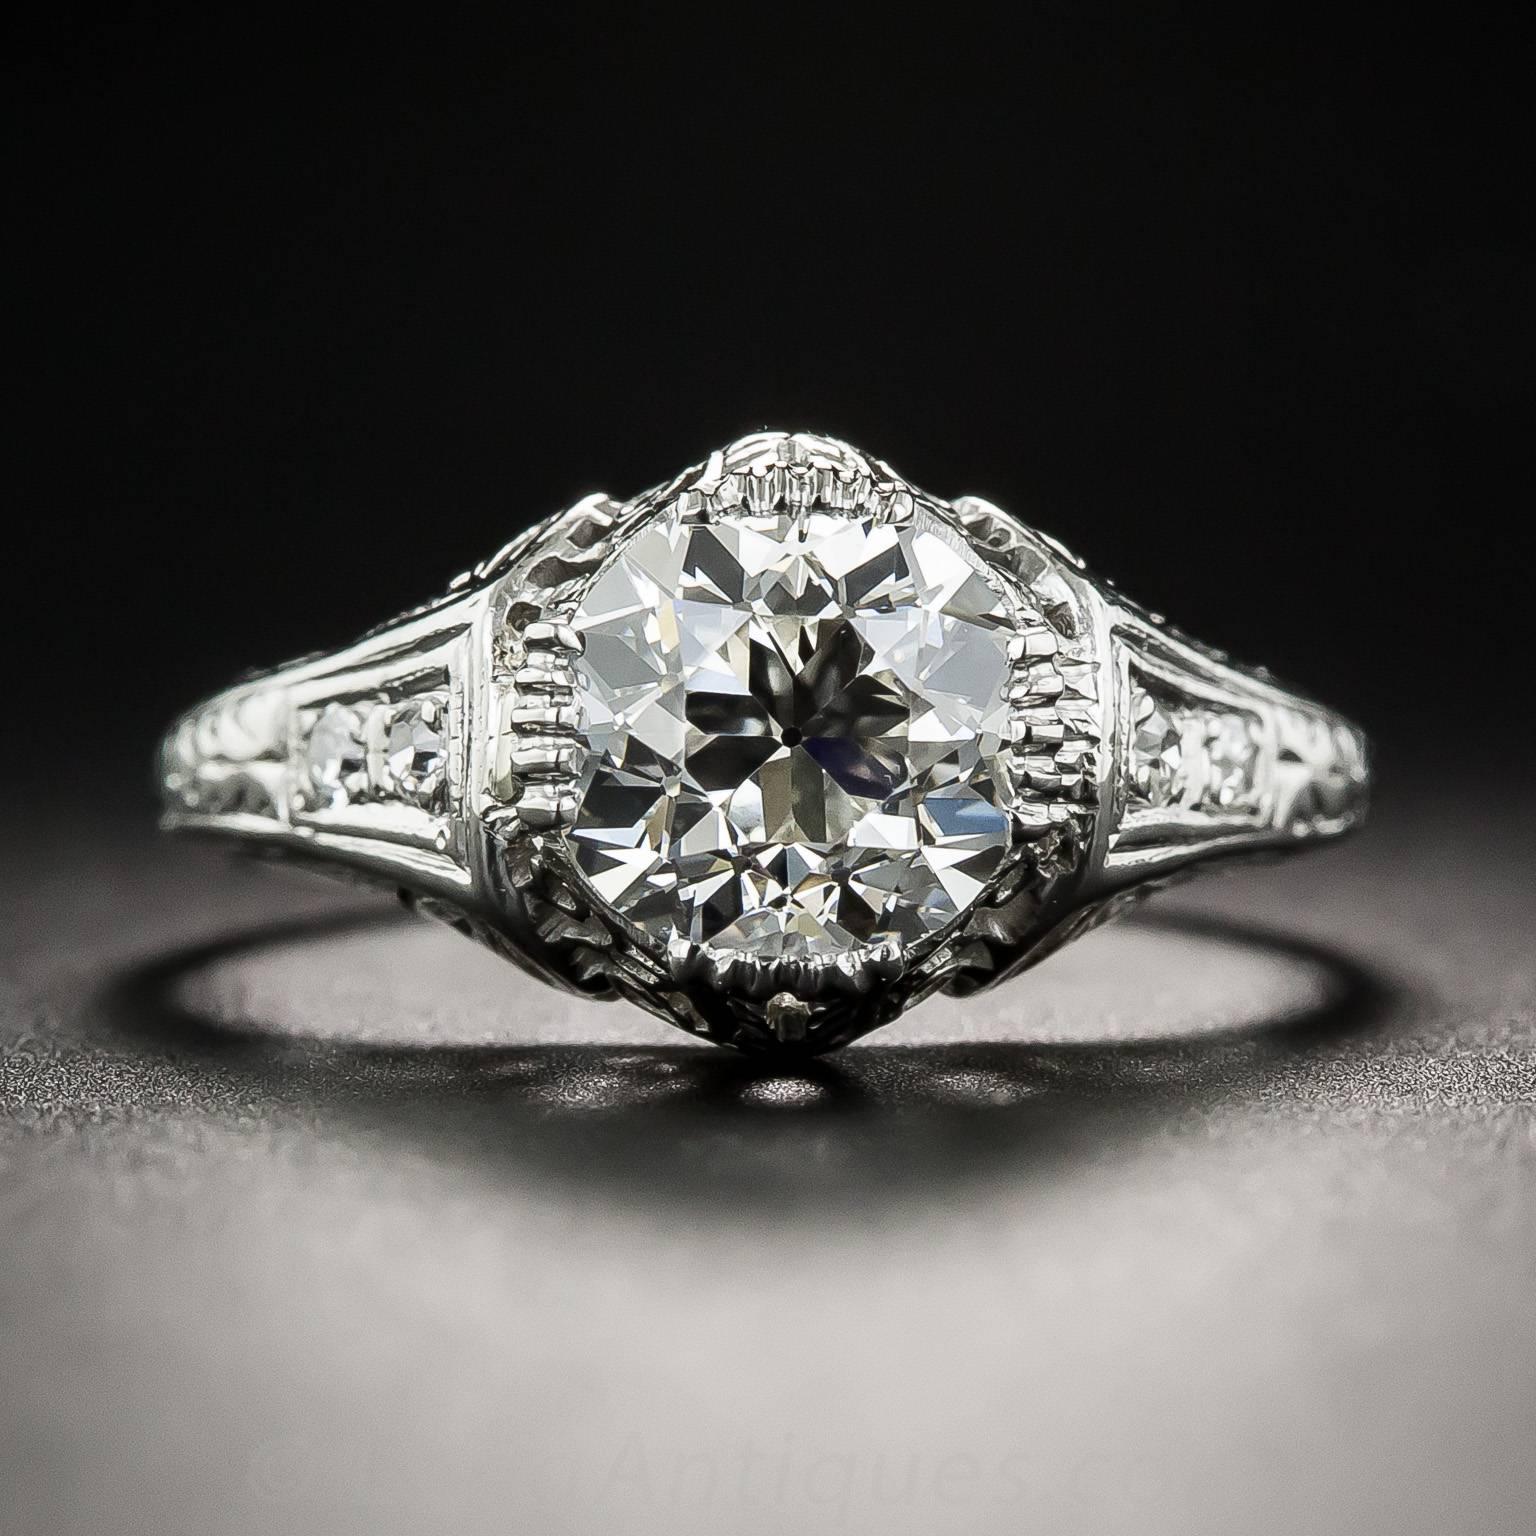 Neoclassical design motifs distinguishes this refined and radiant Art Deco dazzler, hand-fabricated in platinum with hand-pierced and engraved details - circa 1920s-30s. Featuring a gorgeous bright-white and brilliant European-cut diamond, weighing